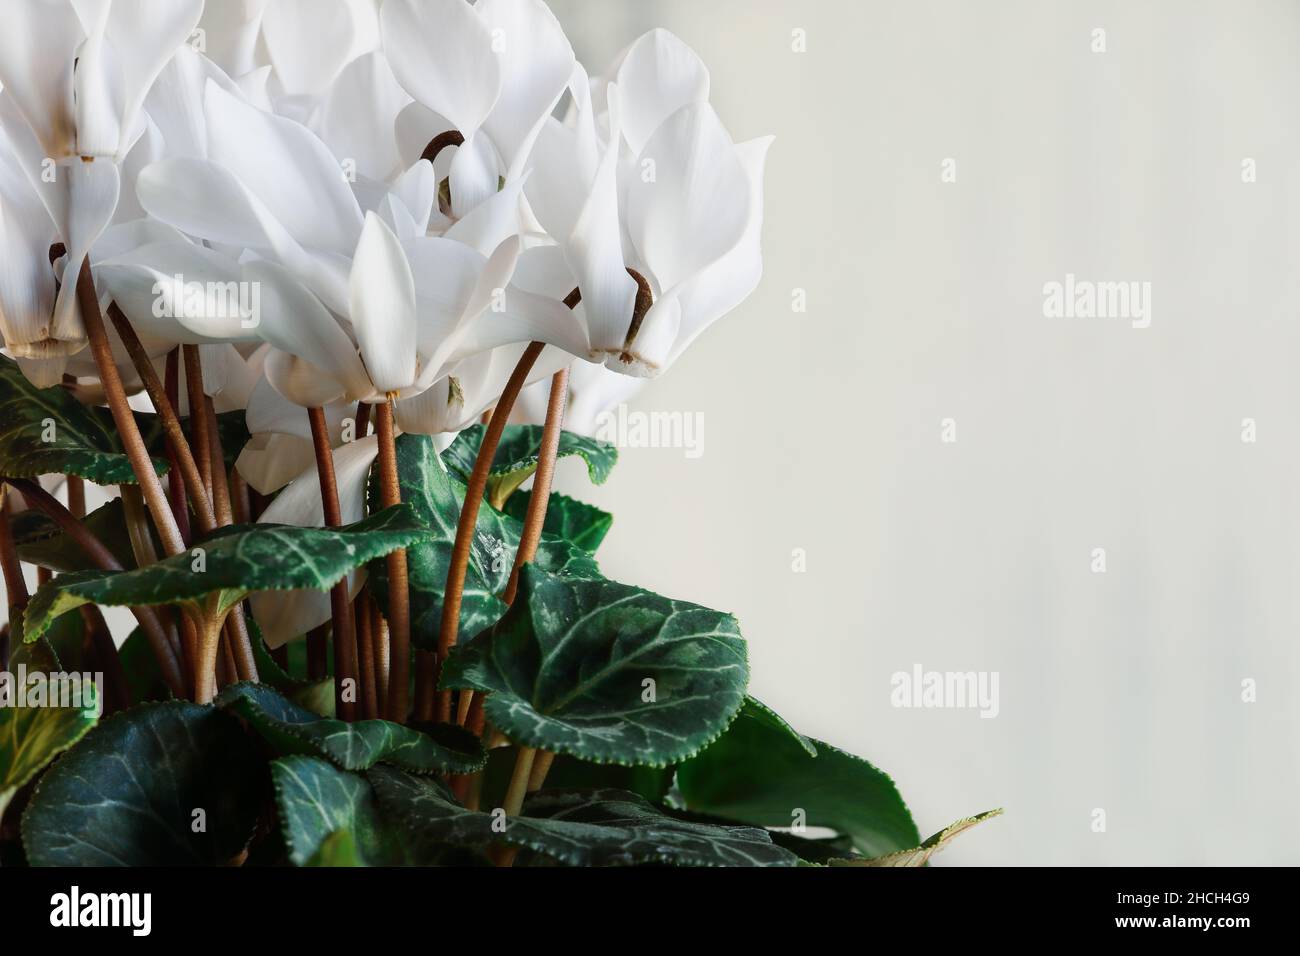 Potted White Cyclamen, Persian violet, houseplant with free space for text. Selective focus with blurred background and foreground. Stock Photo